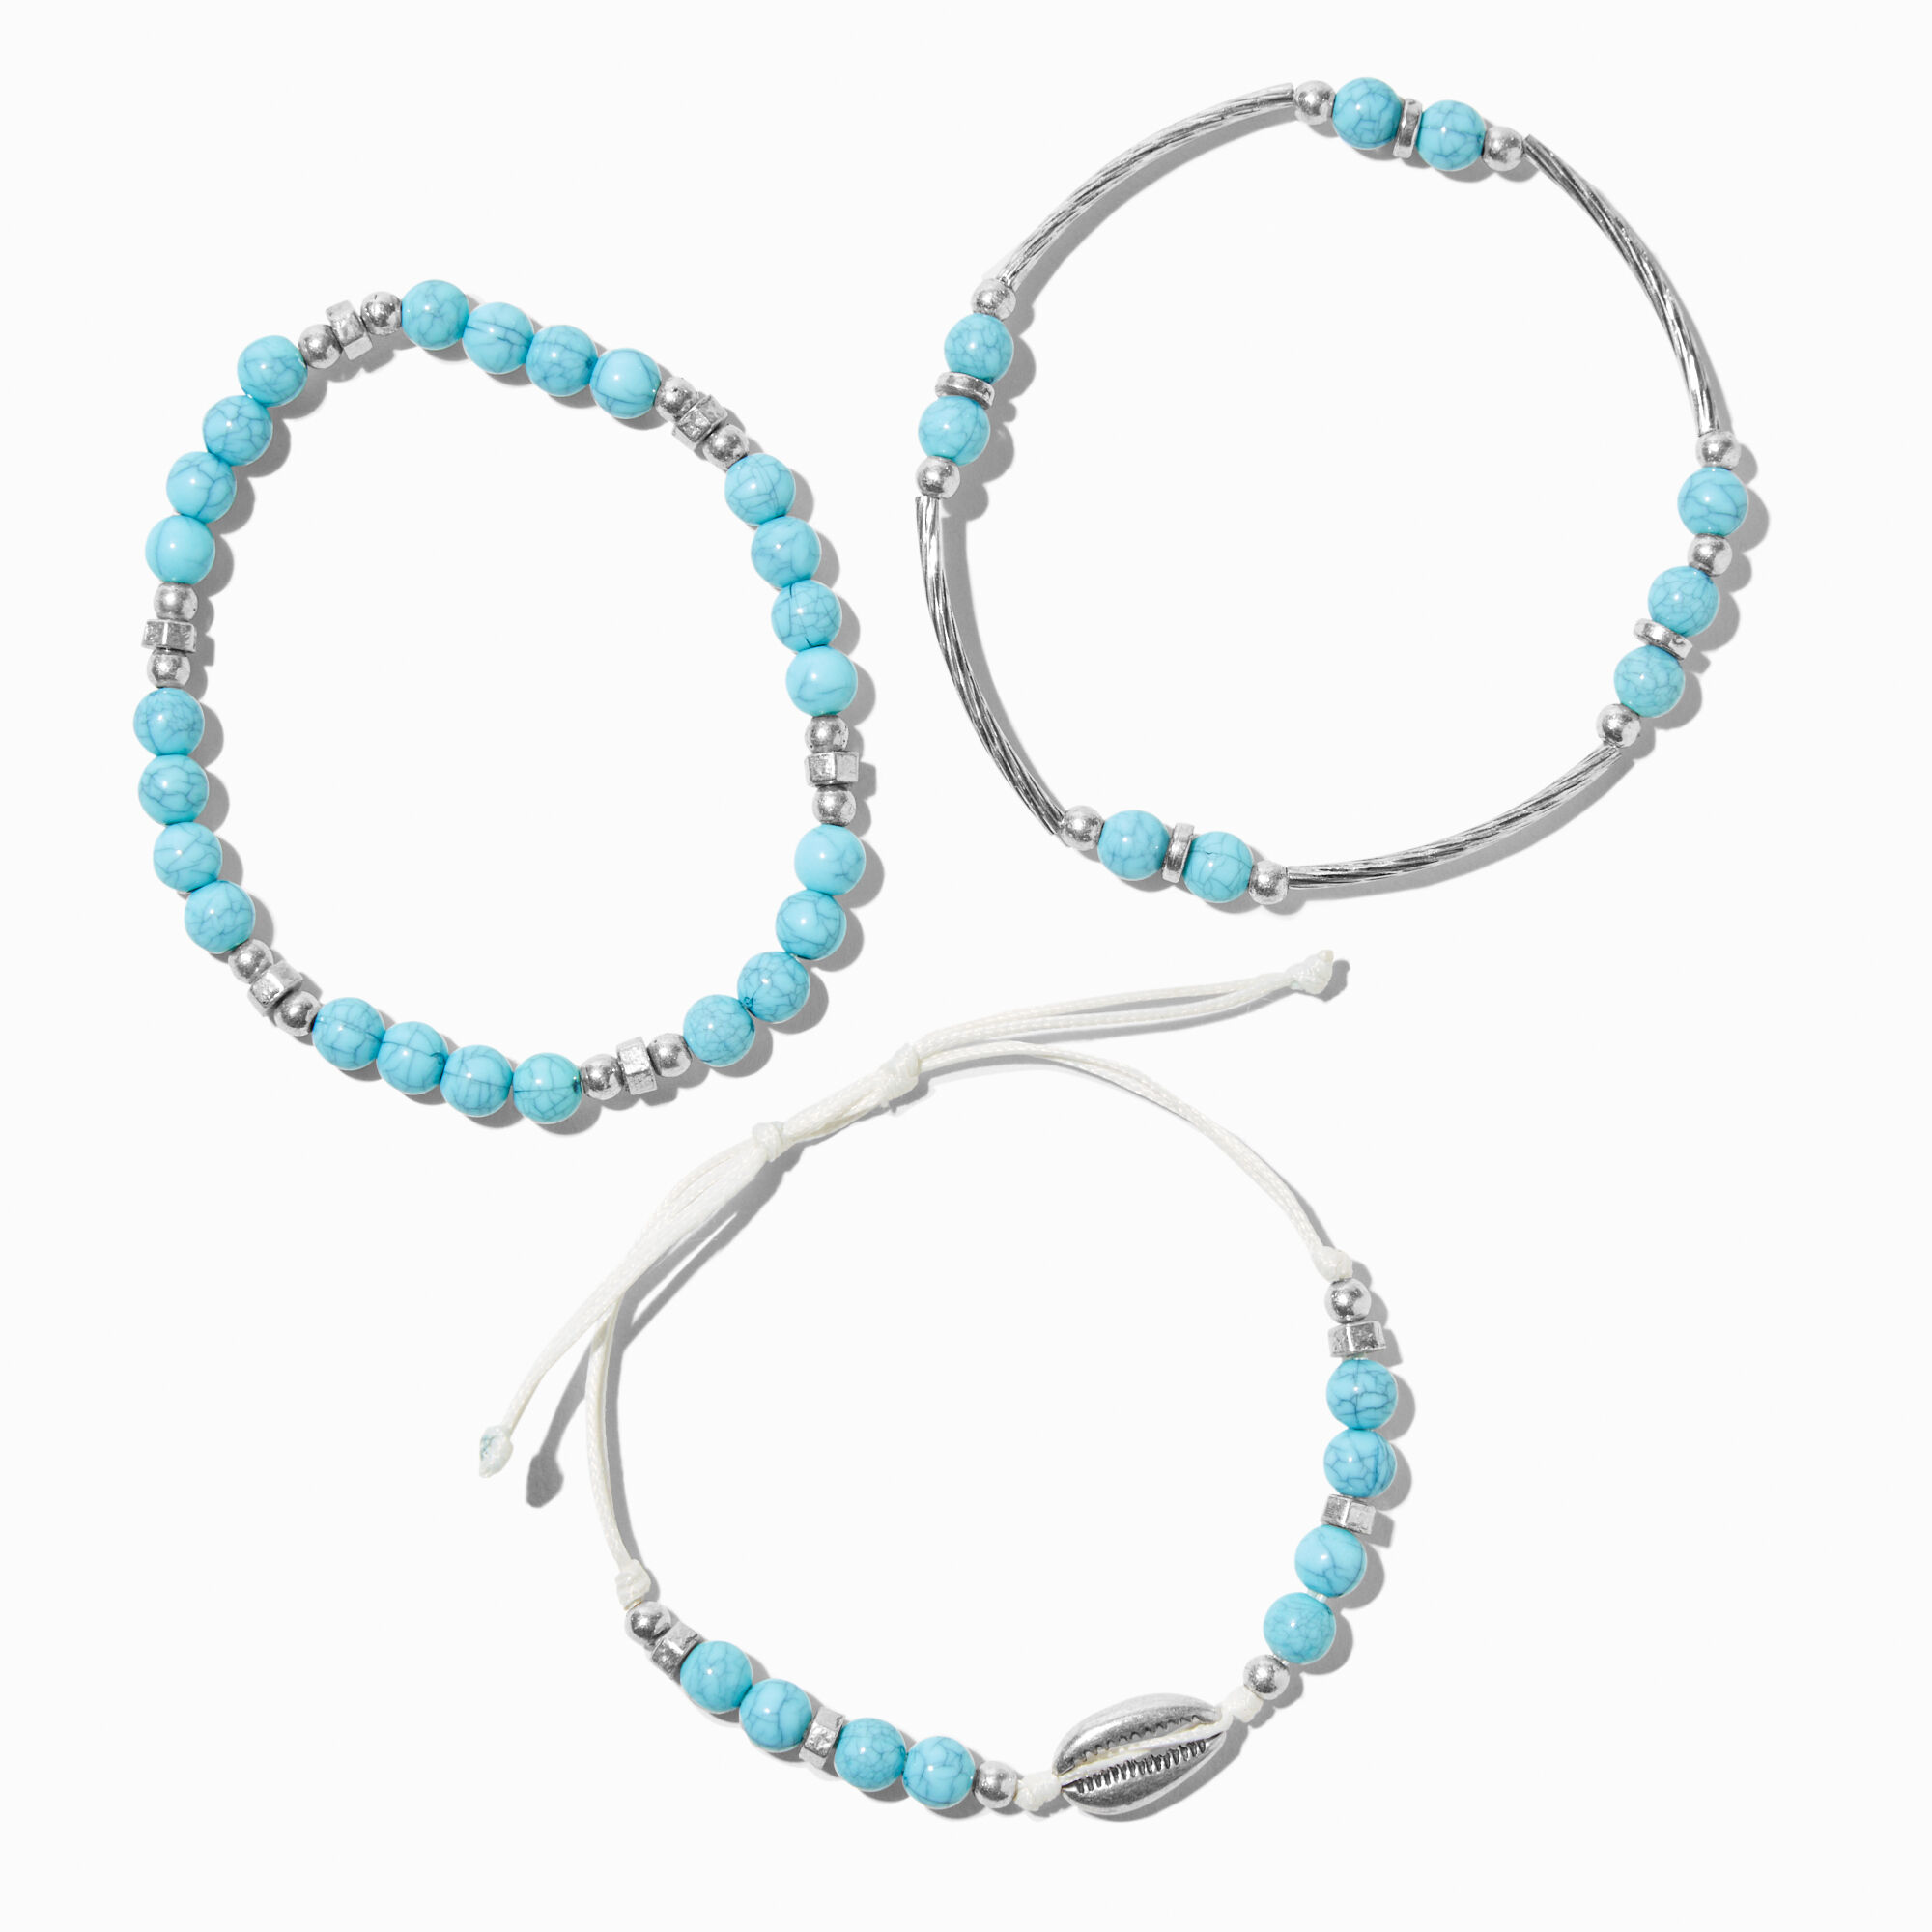 View Claires Beaded Cowrie Seashell Bracelet Set 3 Pack Turquoise information